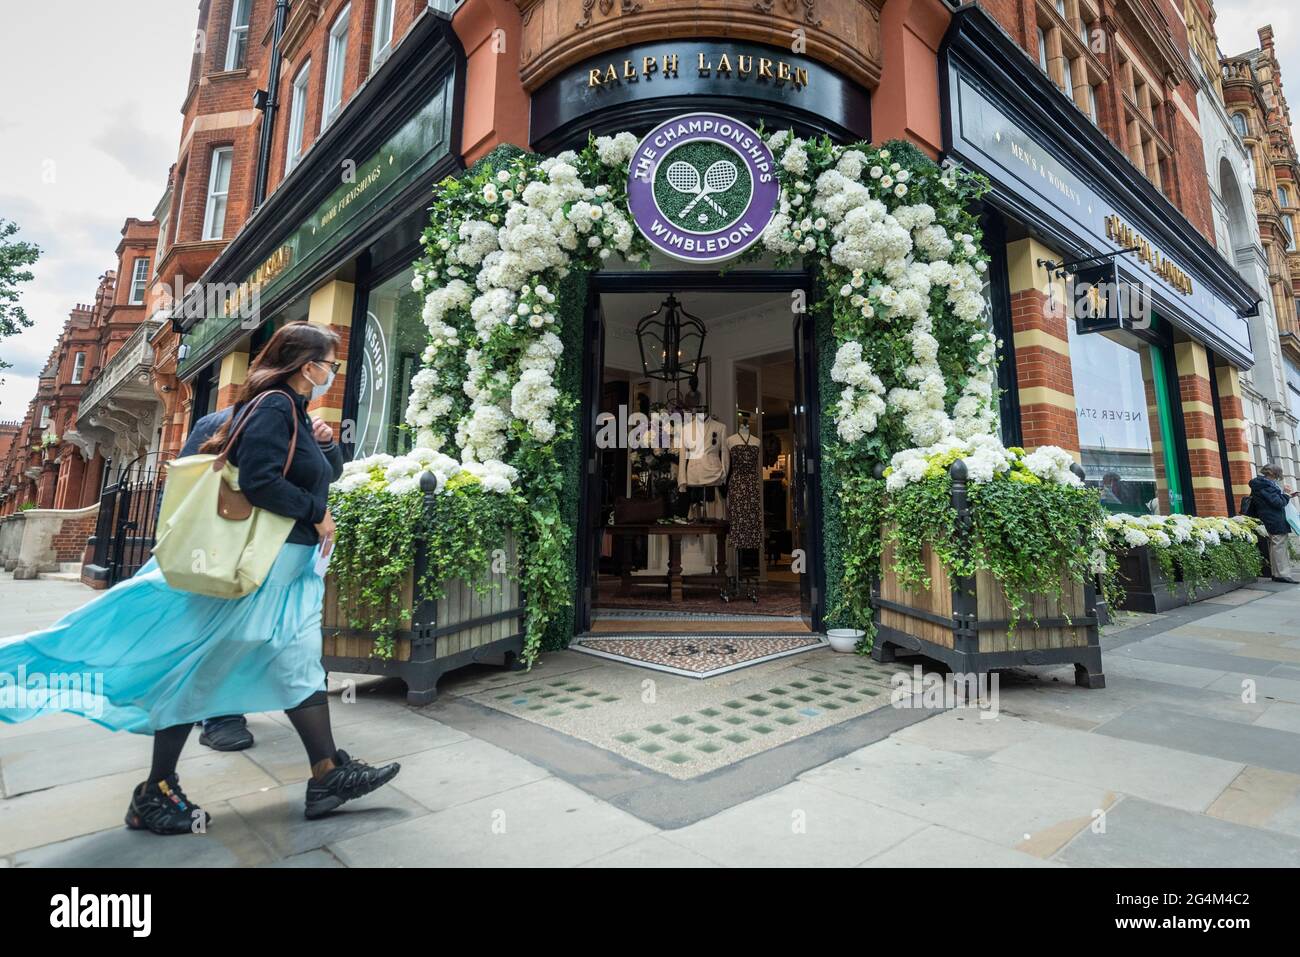 London, UK. 22 June 2021. A woman walks past the exterior of the Ralph  Lauren store in Sloane Square, decorated ahead of this year's upcoming  Wimbledon tennis championships at the All England